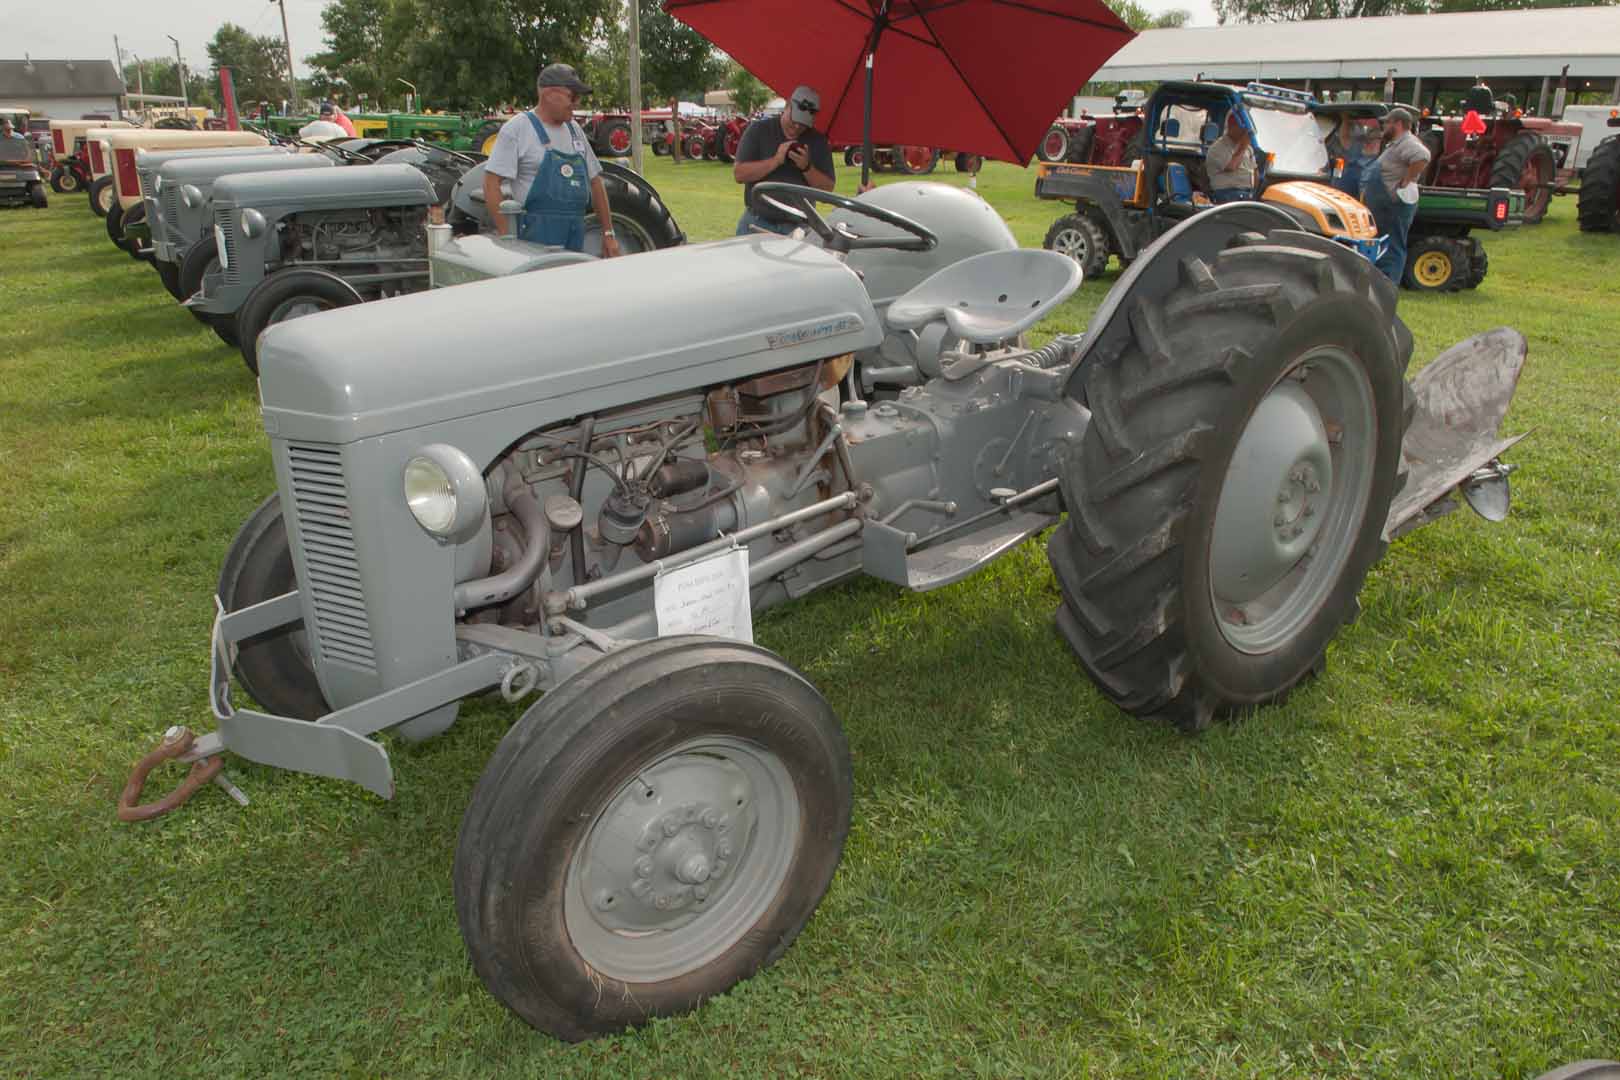 1952 TO-30 owned by Norm and Carol Fleagle of Indianola, IA.  Implement is a Ferguson convertible two-bottom plow.